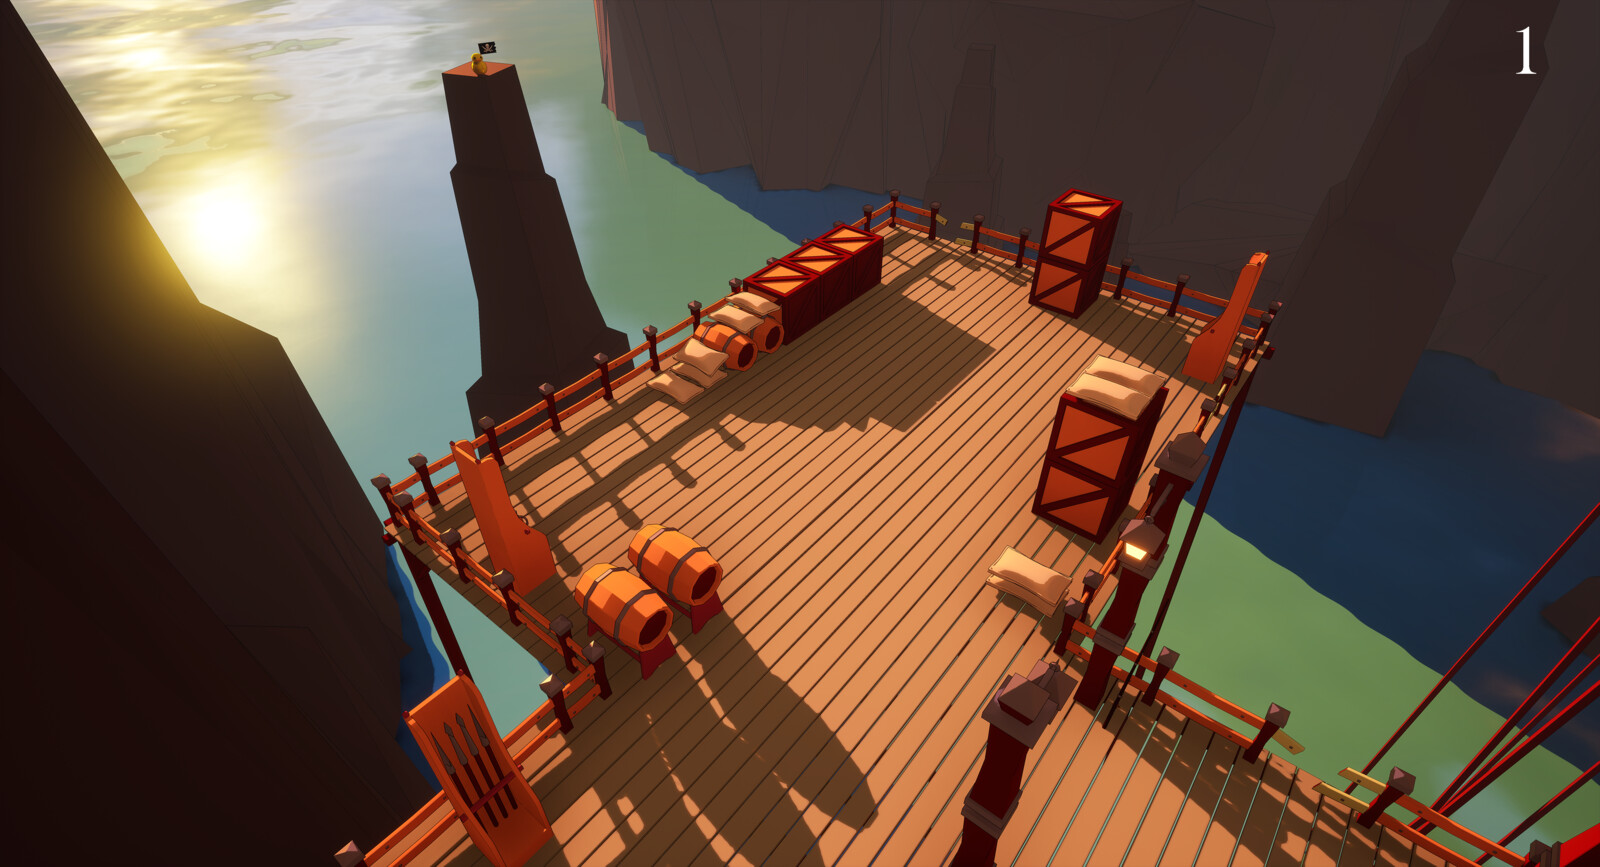 Final render of the beginning of the level